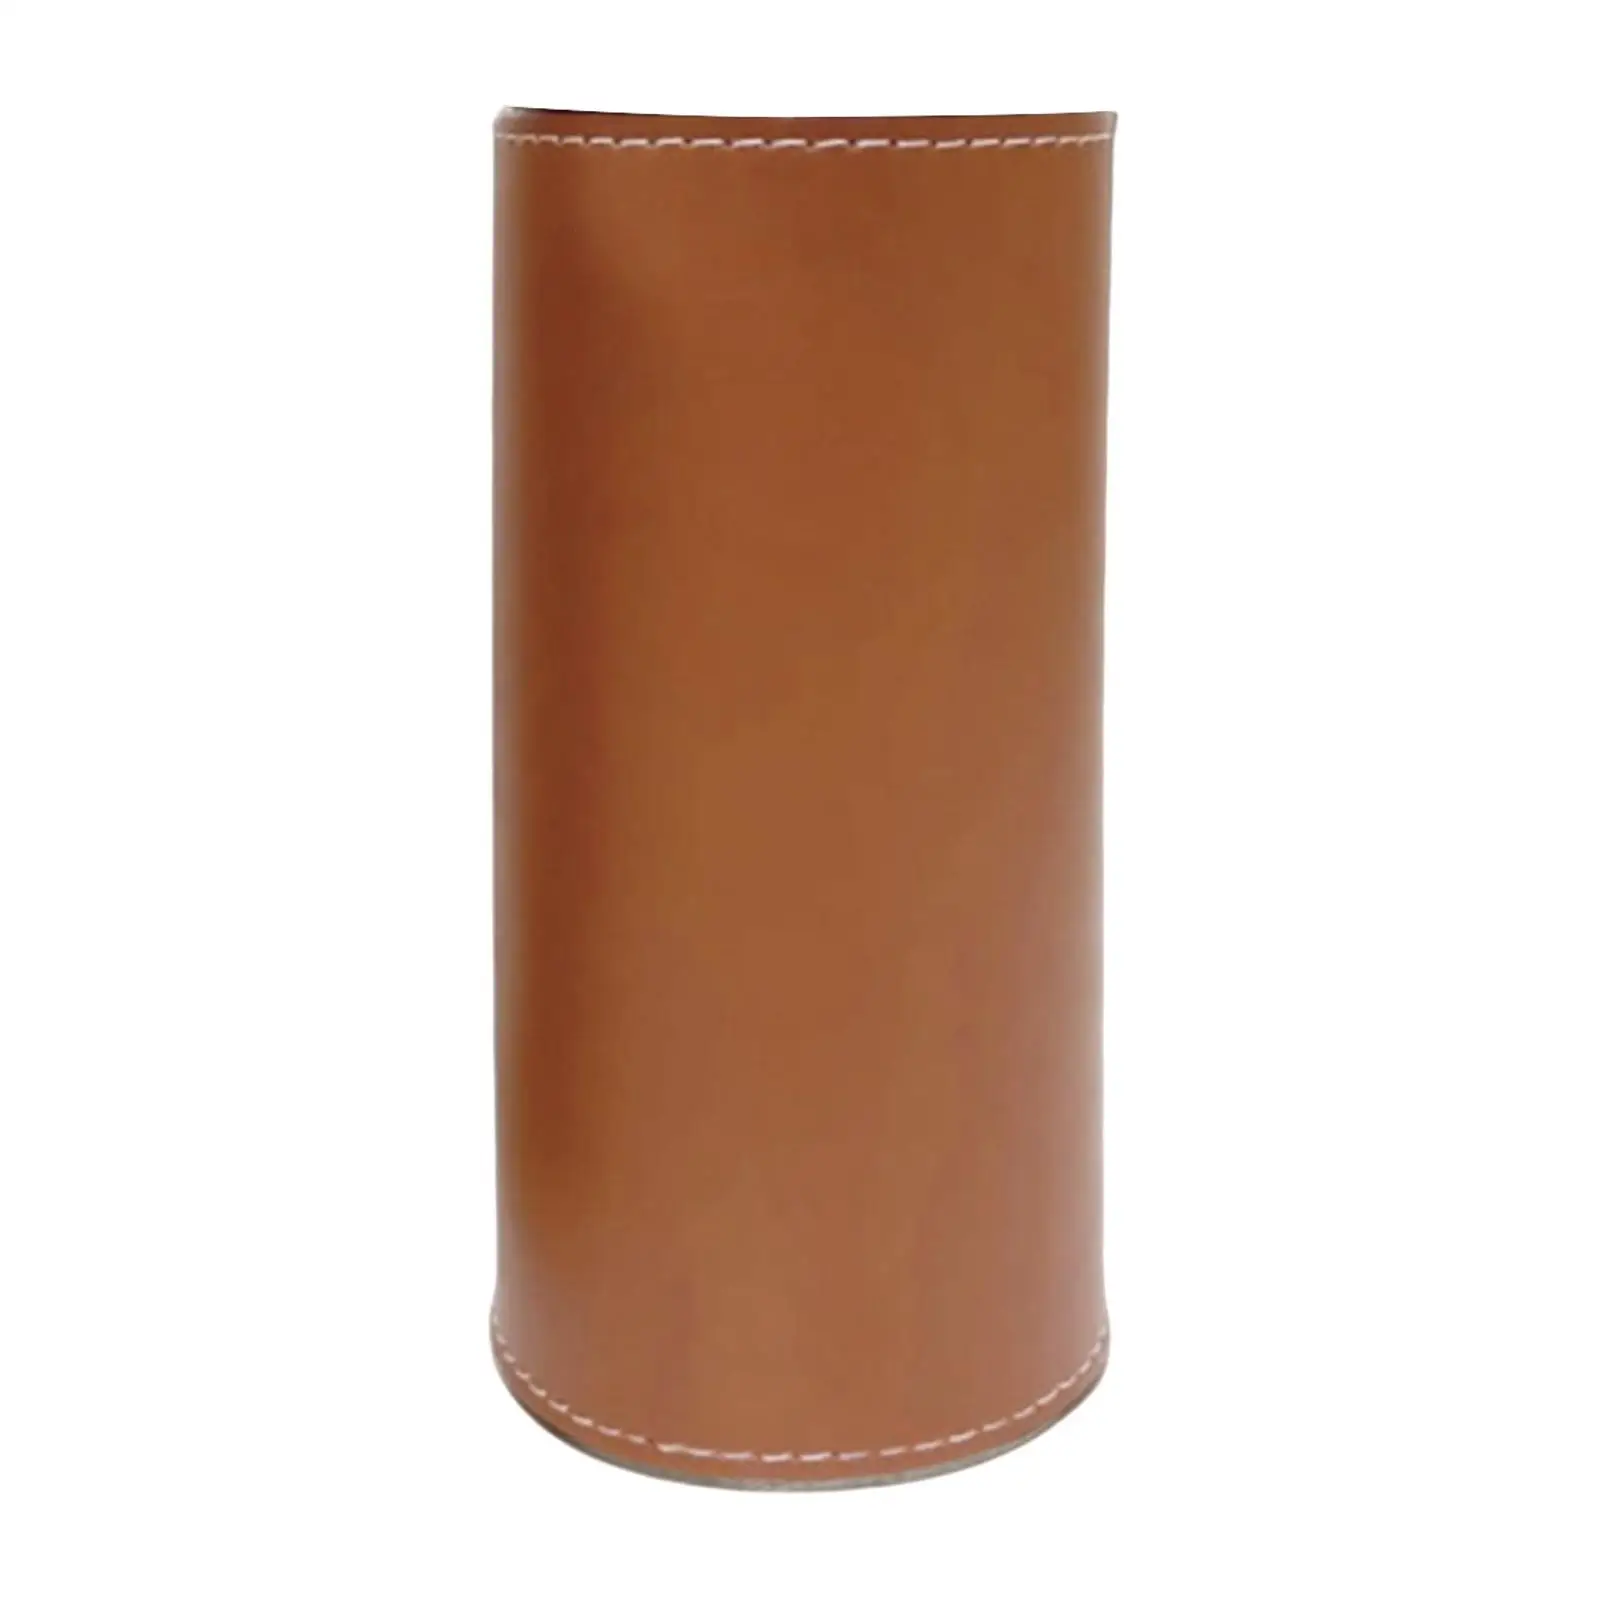 Gas Canister Cover Easy Using Supplies Faux Leather Durable Bag Gas Cylinder Tank Cover for Hiking BBQ Cooking Picnic Outdoor